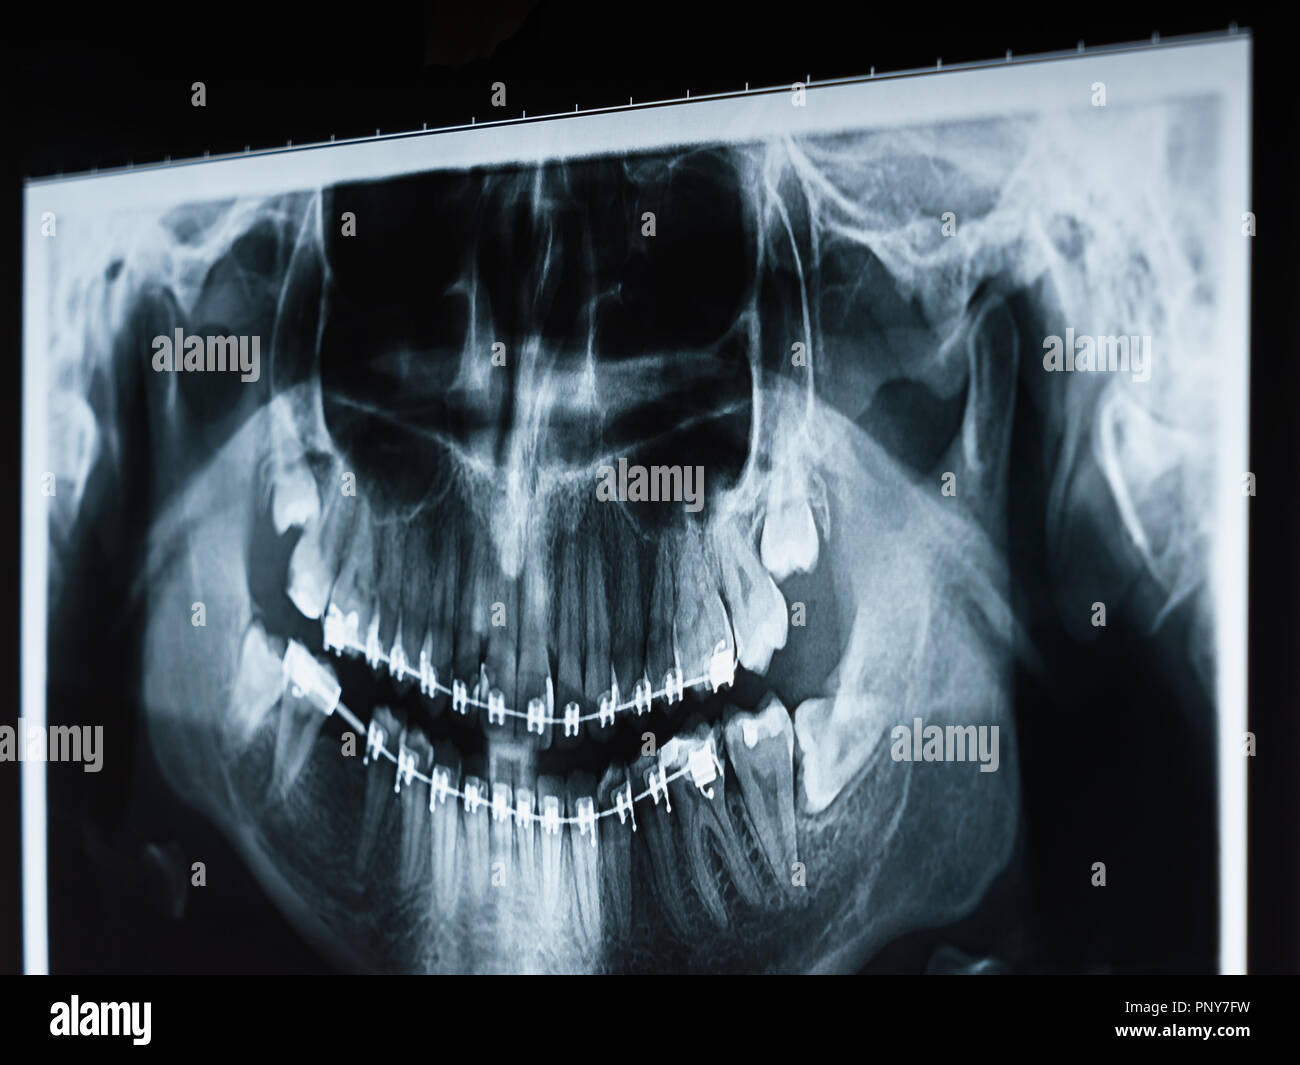 Dental X-Ray Photo Of Human Skull And Teeth With Braces Stock Photo